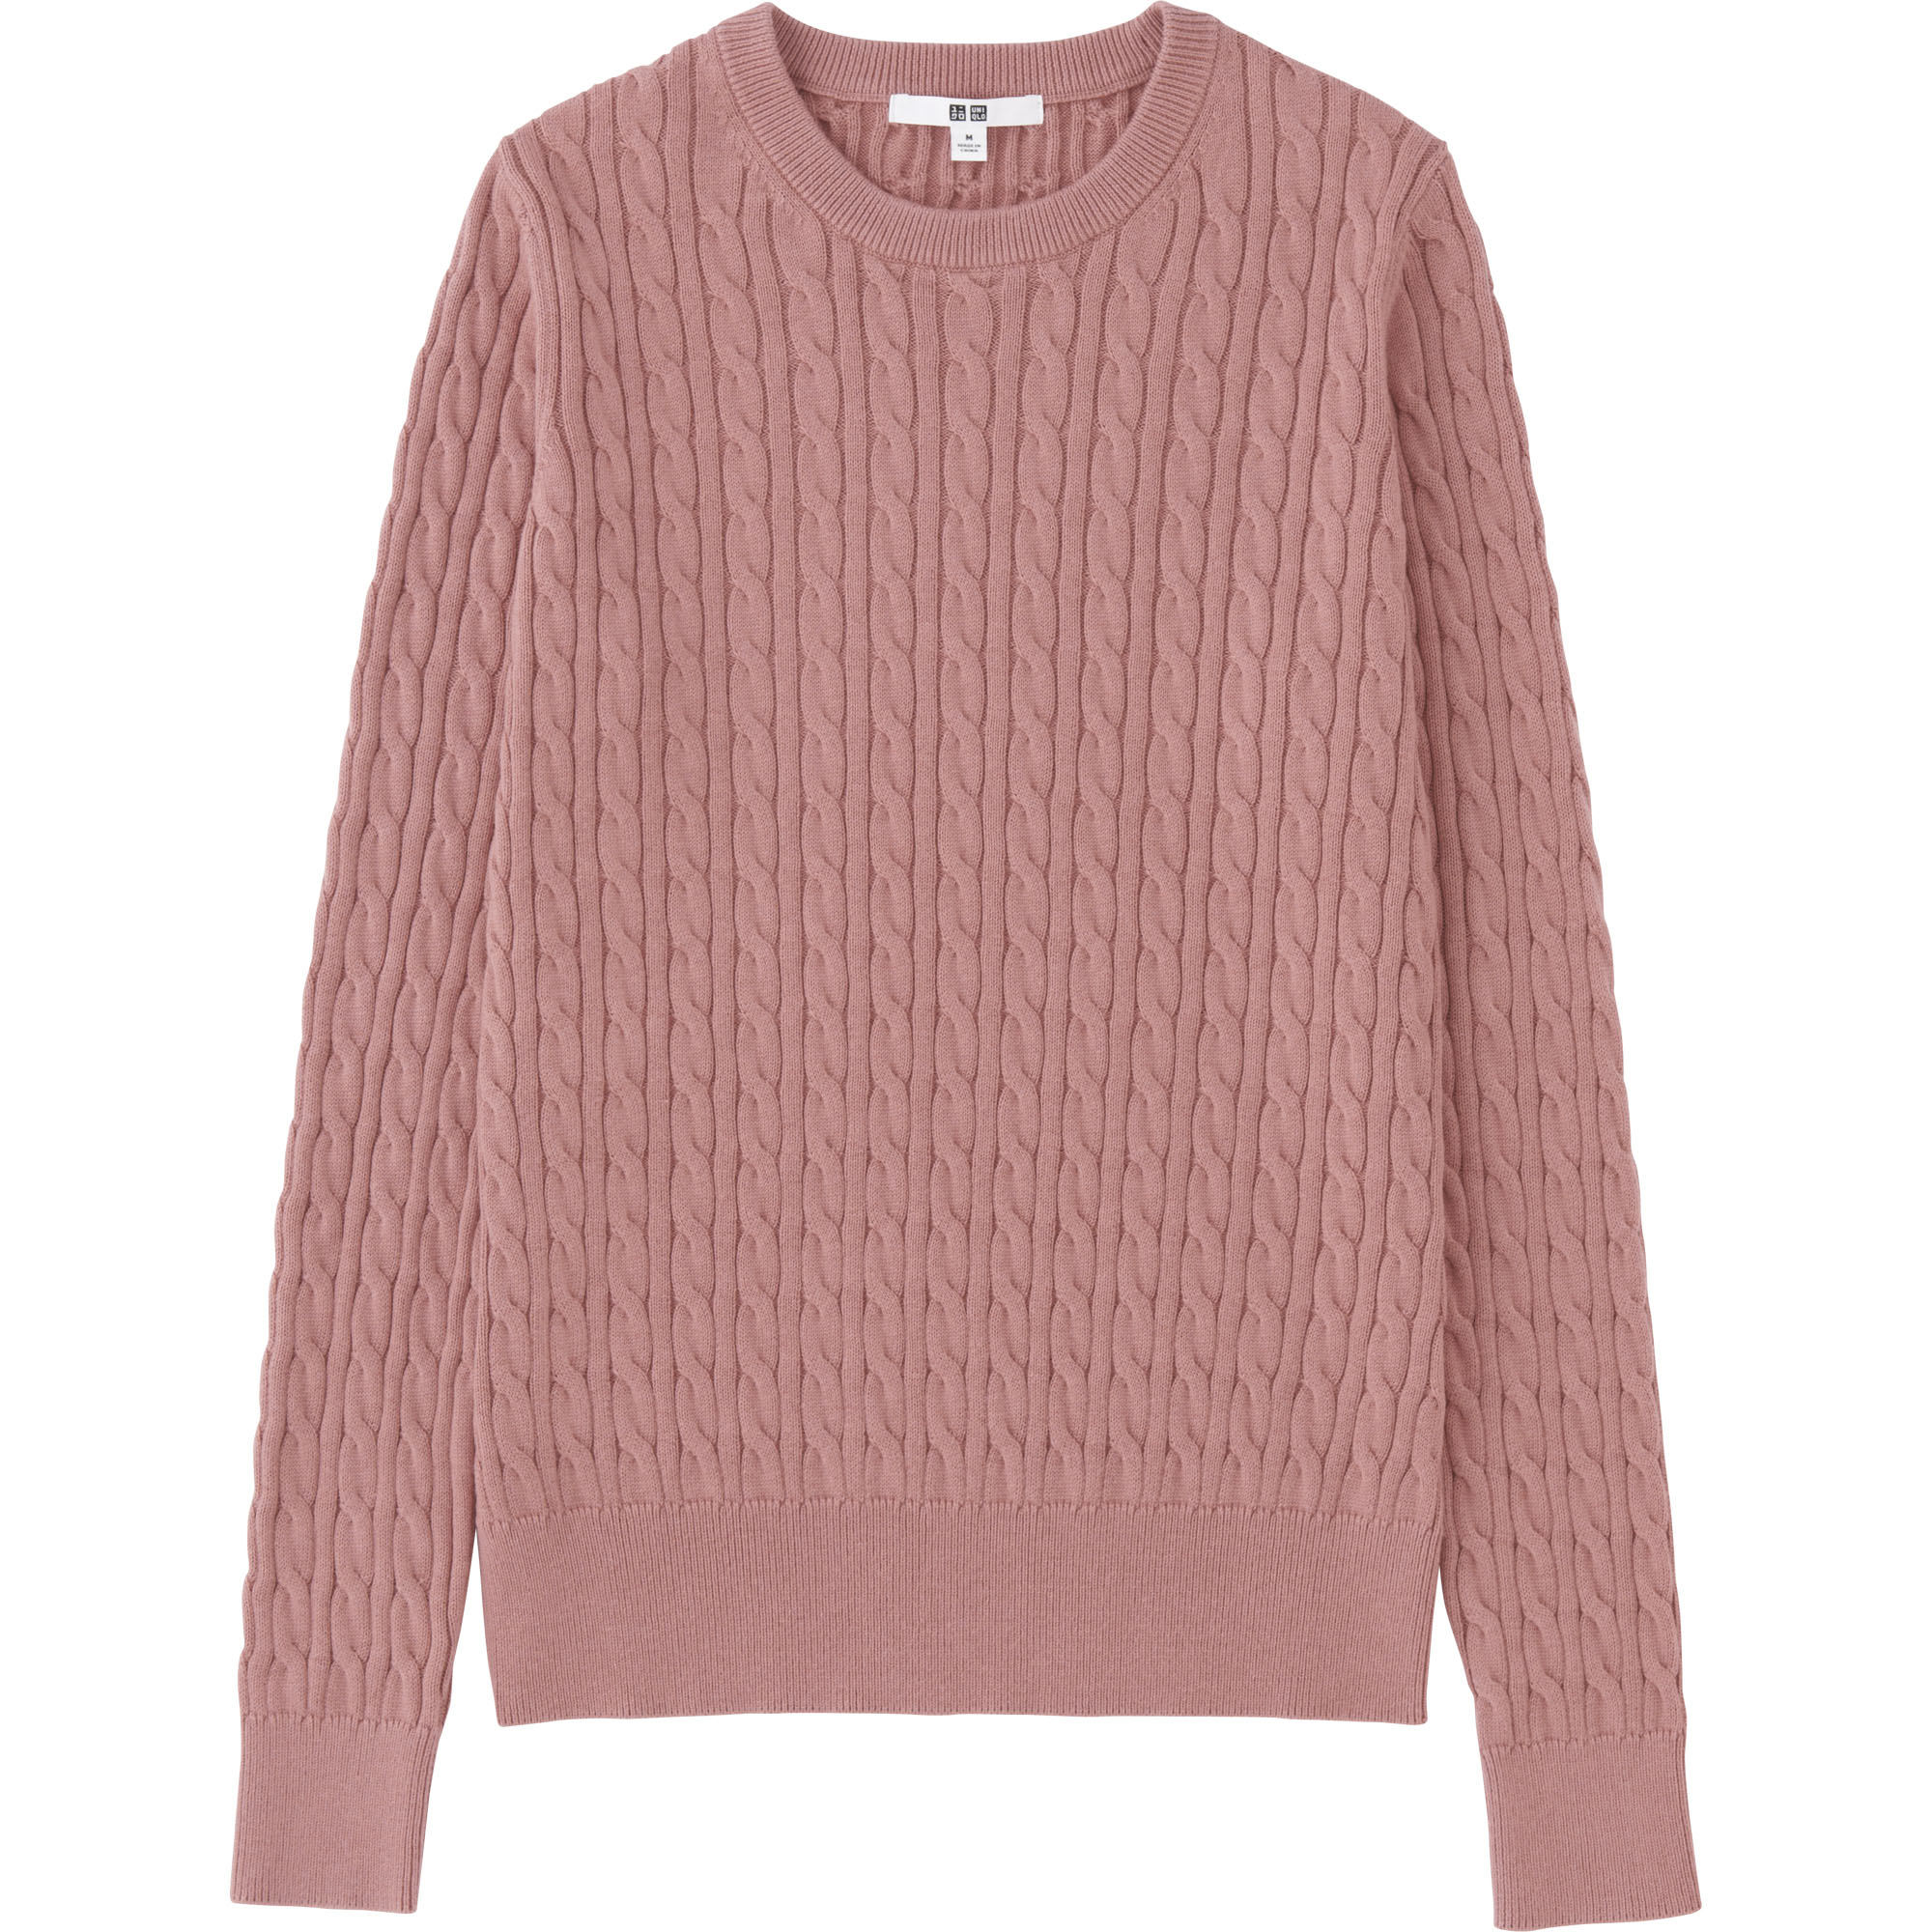 Cotton Cashmere Cable Sweater - Oxford Street